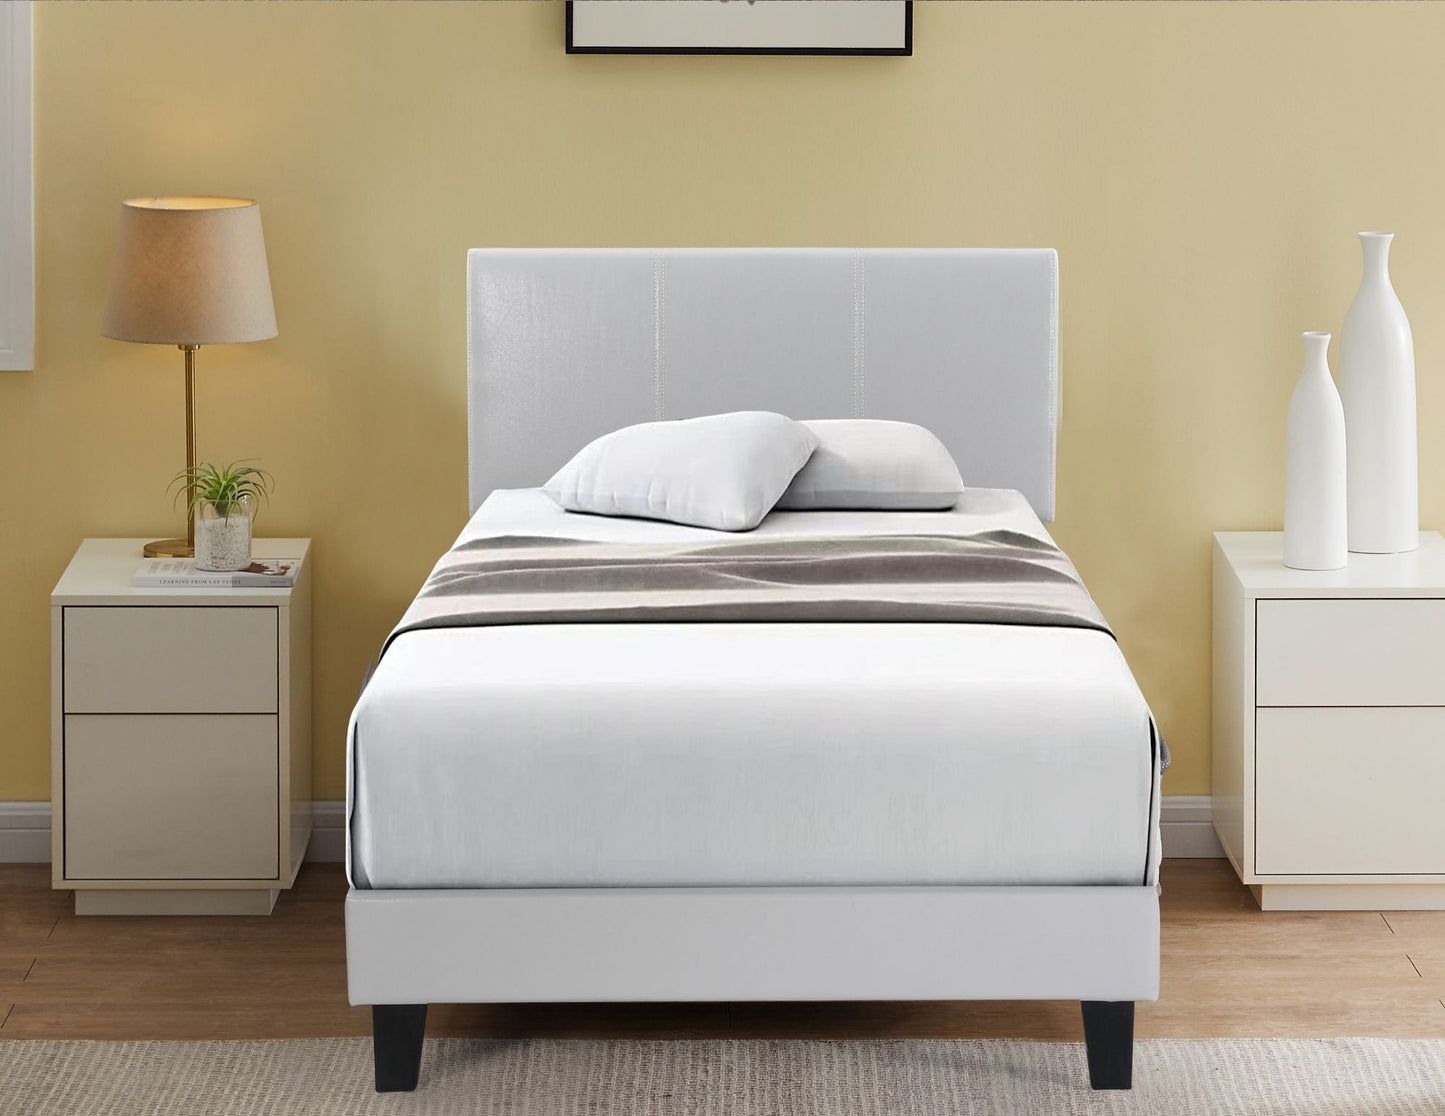 QUEEN SIZE- (DELTA WHITE)- LEATHER BED FRAME IN A BOX- WITH SLATS